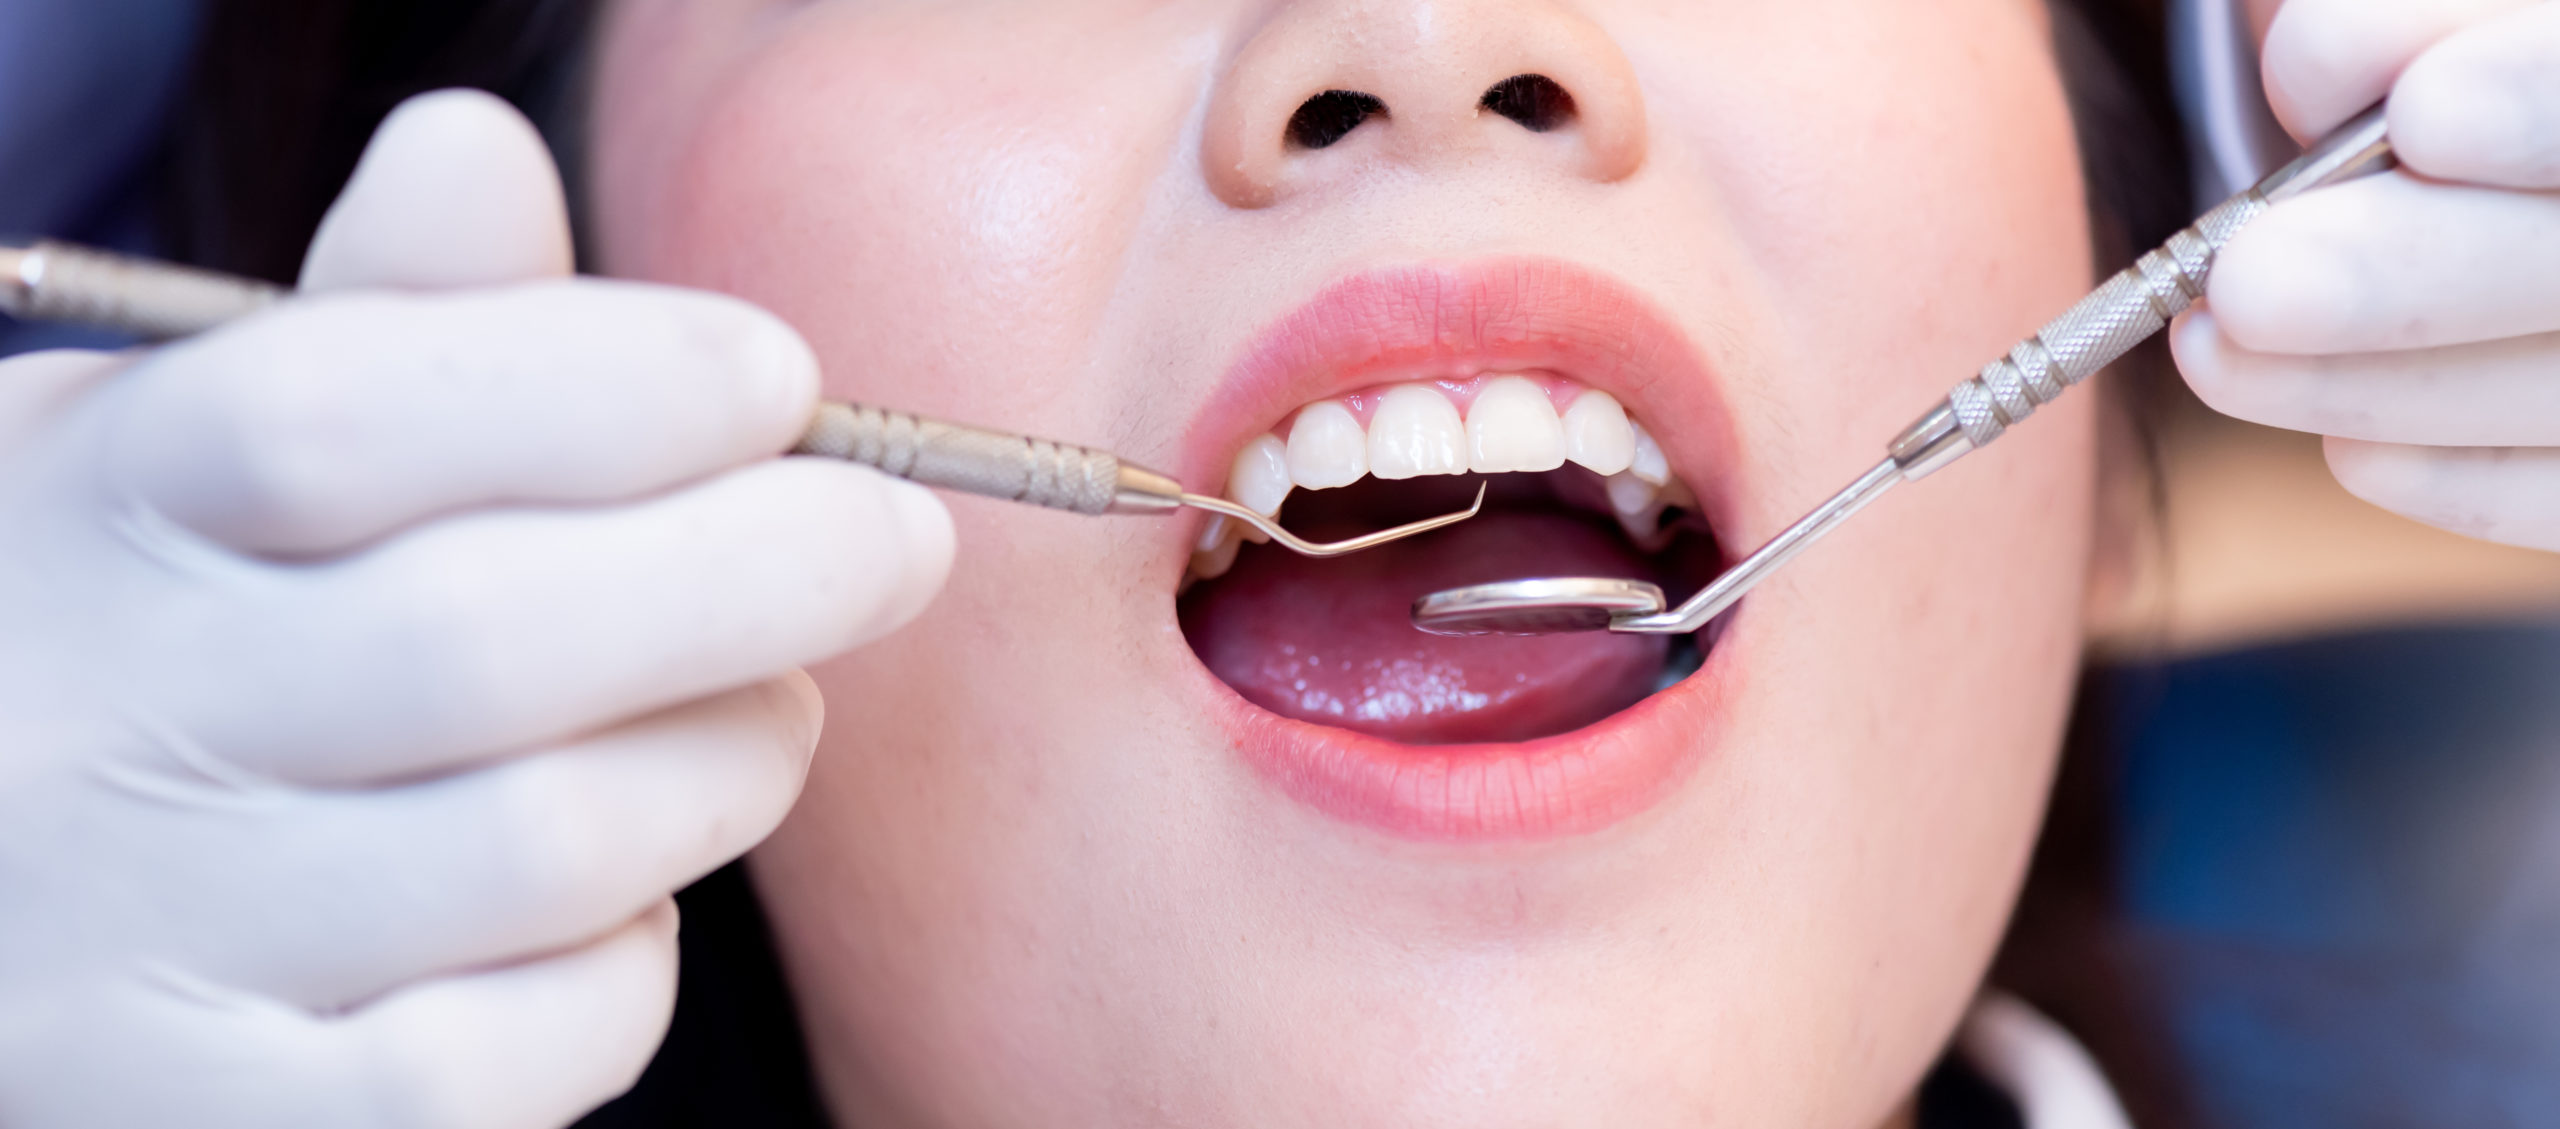 What Are The Steps Of A Full Mouth Reconstruction?